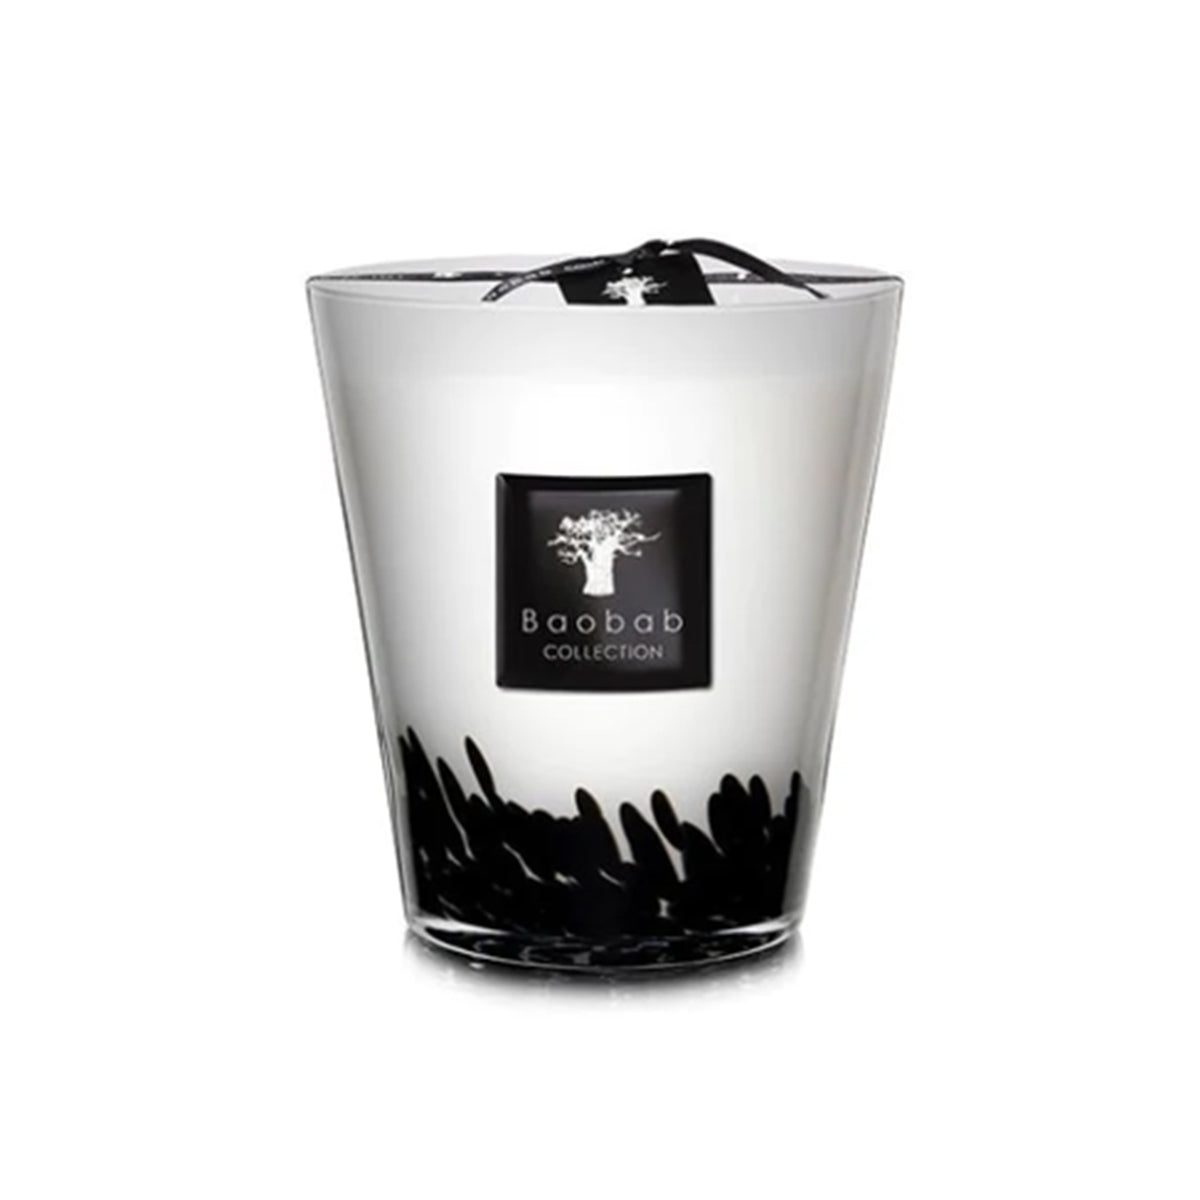 BAOBAB COLLECTION Feathers Candle